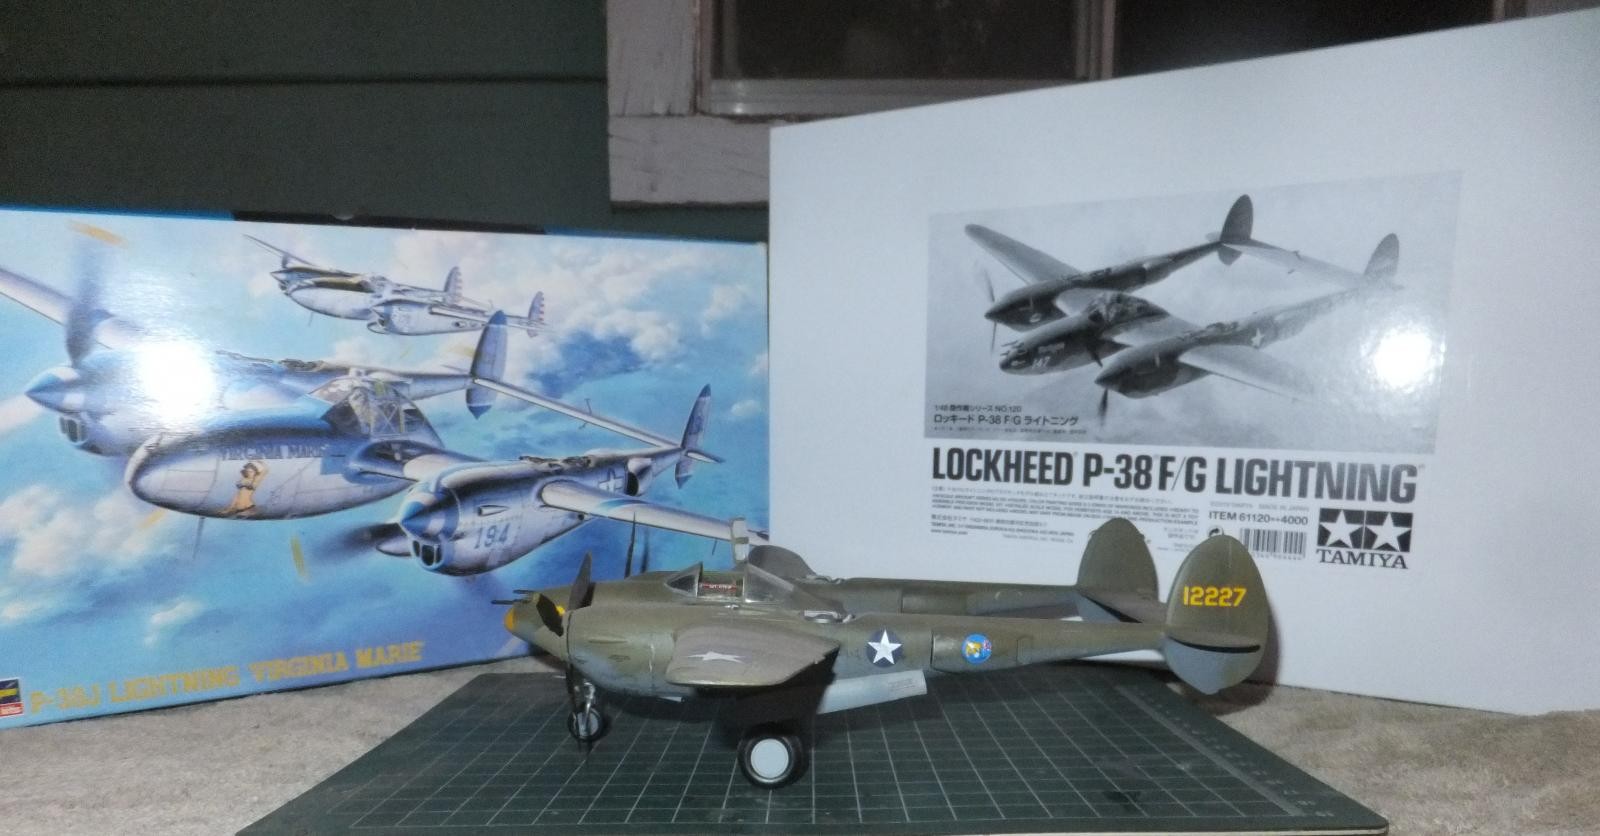 The Modelling News: Review: Tamiya's 1/48th scale P-38 F/G Lightning white  box version